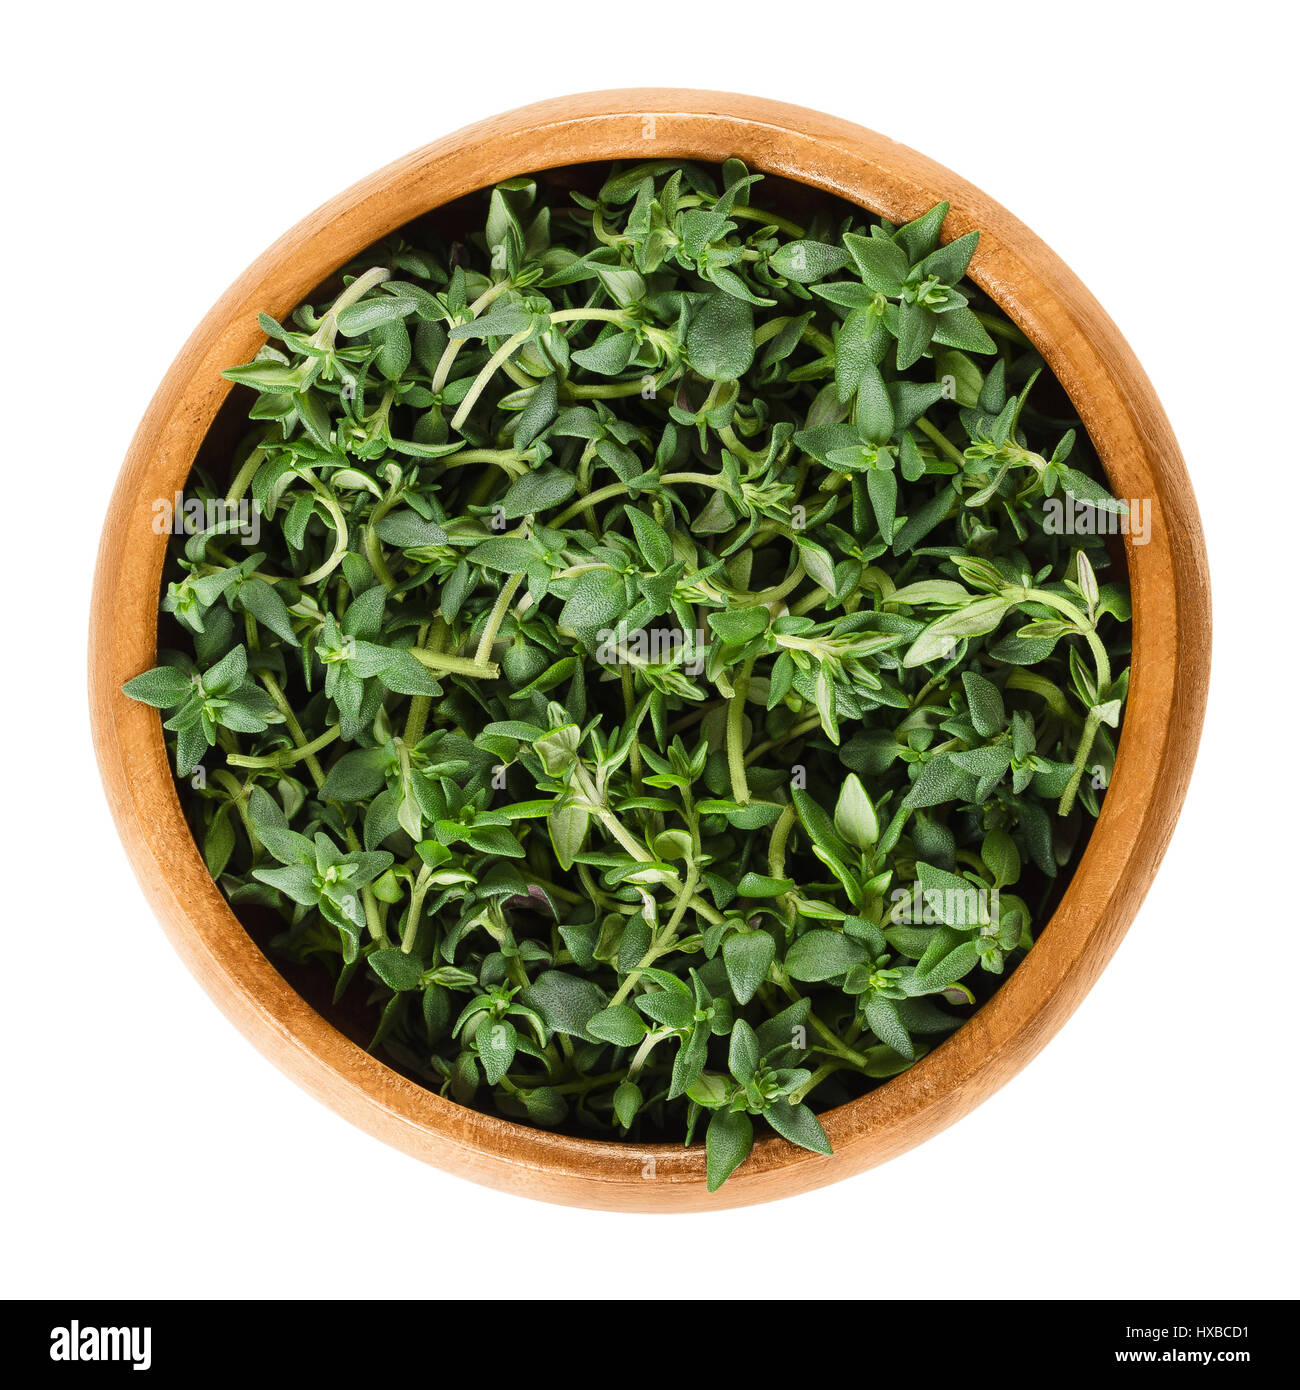 Fresh thyme stems in wooden bowl. Green herb with culinary, medicinal and ornamental uses. Thymus vulgaris is a relative of oregano. Stock Photo